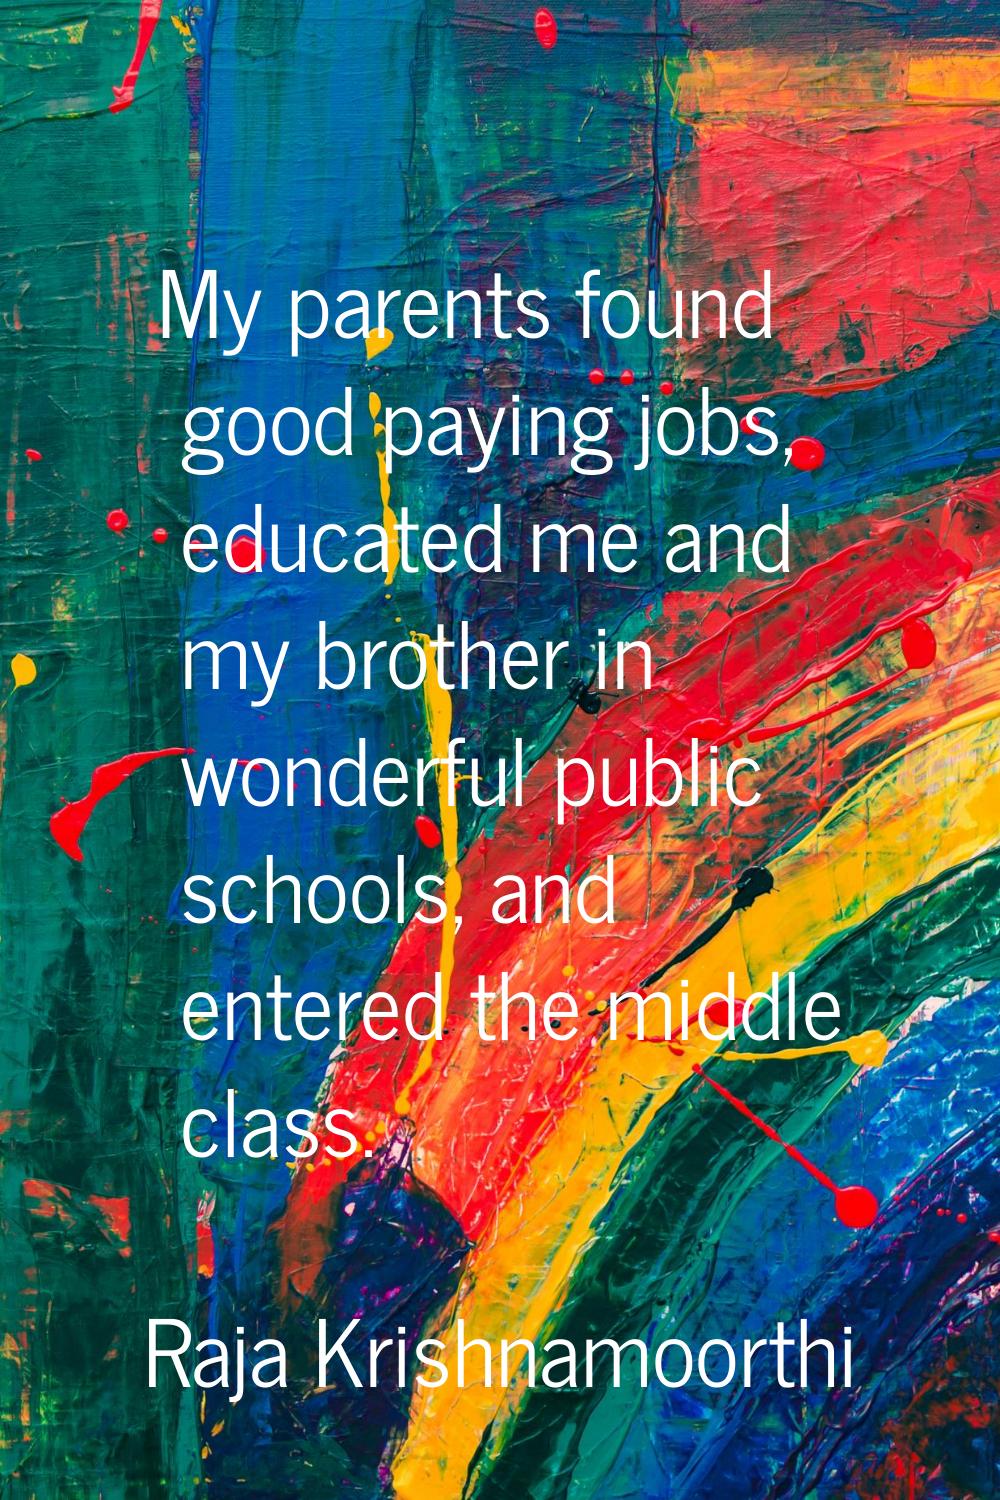 My parents found good paying jobs, educated me and my brother in wonderful public schools, and ente